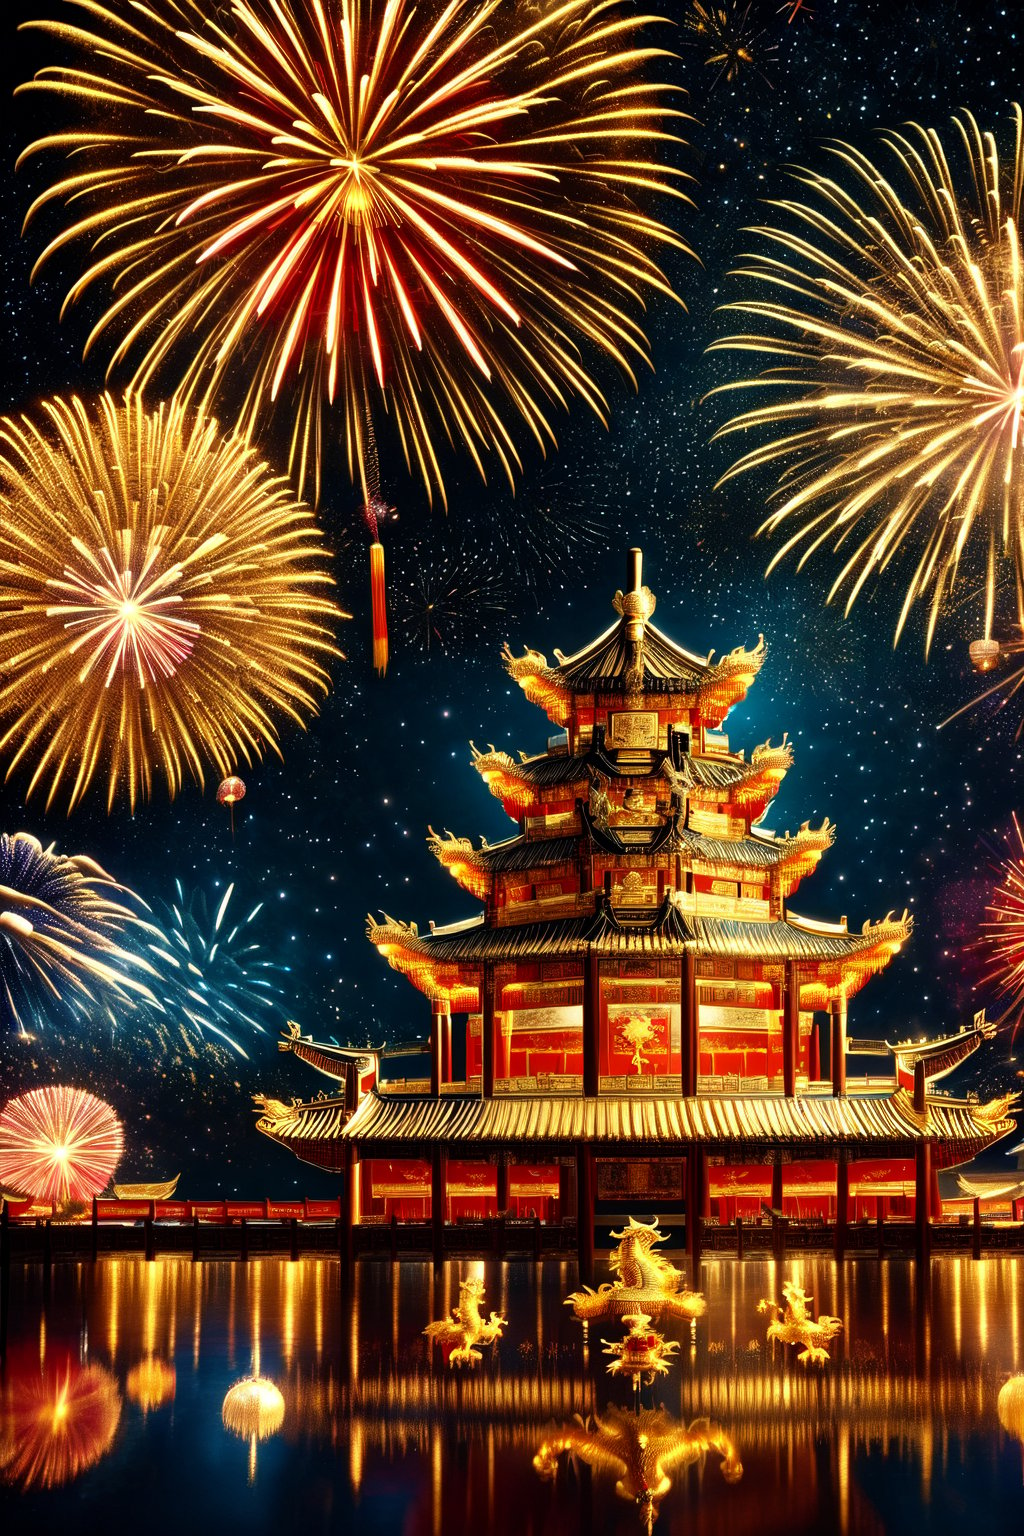 Masterpiece, high quality:1.5, 64K resolution, HDR, grand night scene with a Chinese boy in traditional attire under a starry sky, a magnificent golden Chinese dragon above, vibrant fireworks, rich colors, intricate details, cultural depth, panoramic view, (golden Chinese dragon:1.4), (night sky with fireworks:1.3), epic scale.